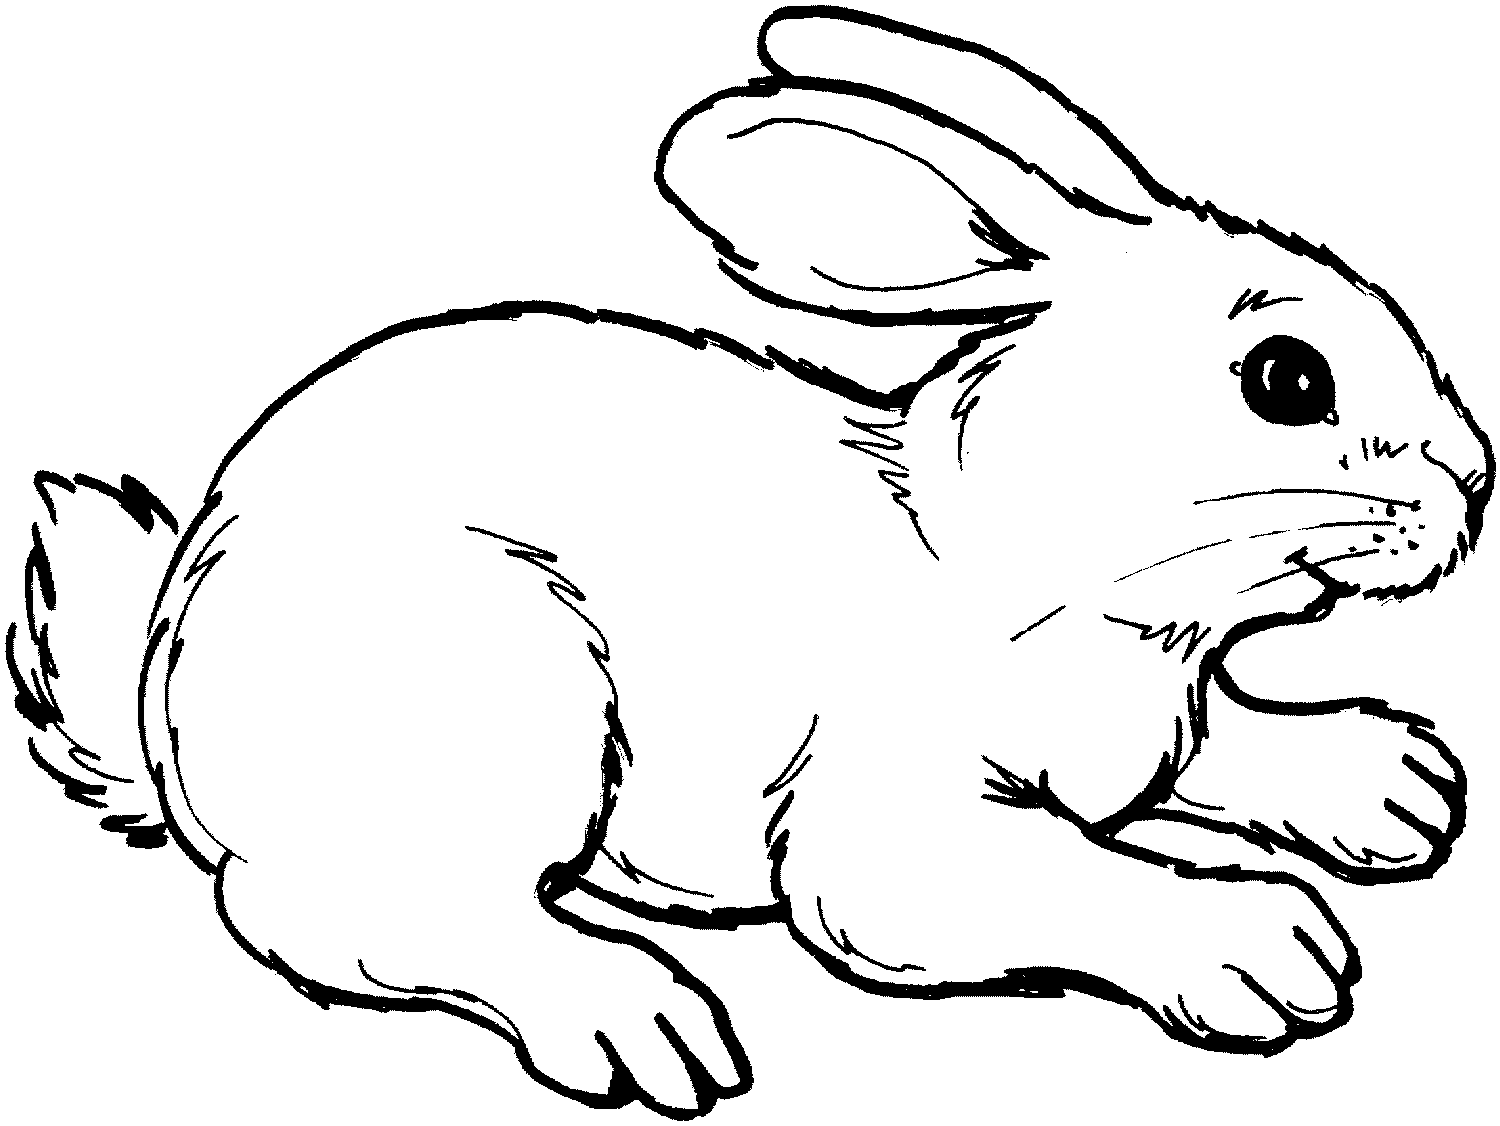 Free Black And White Rabbit Clipart, Download Free Clip Art